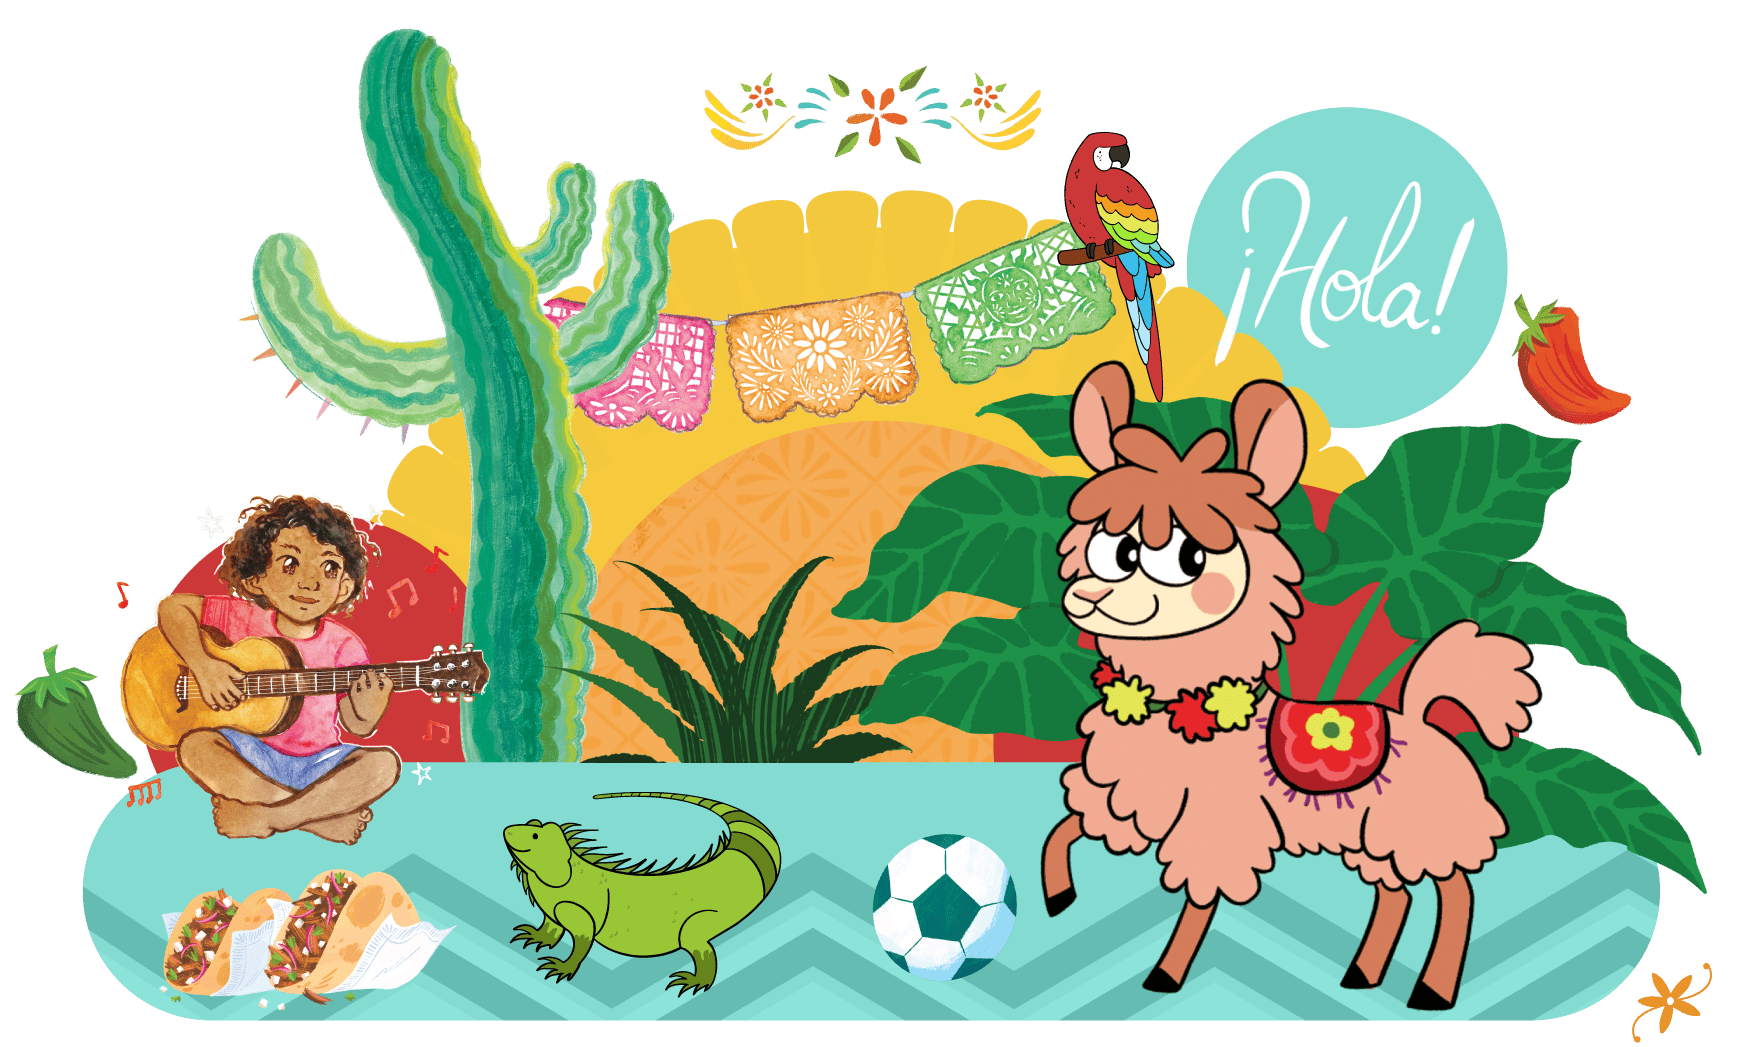 A colorful illustration featuring a child playing guitar, a llama, an iguana, a parrot, and various mexican cultural elements like a cactus and papel picado, with the word 